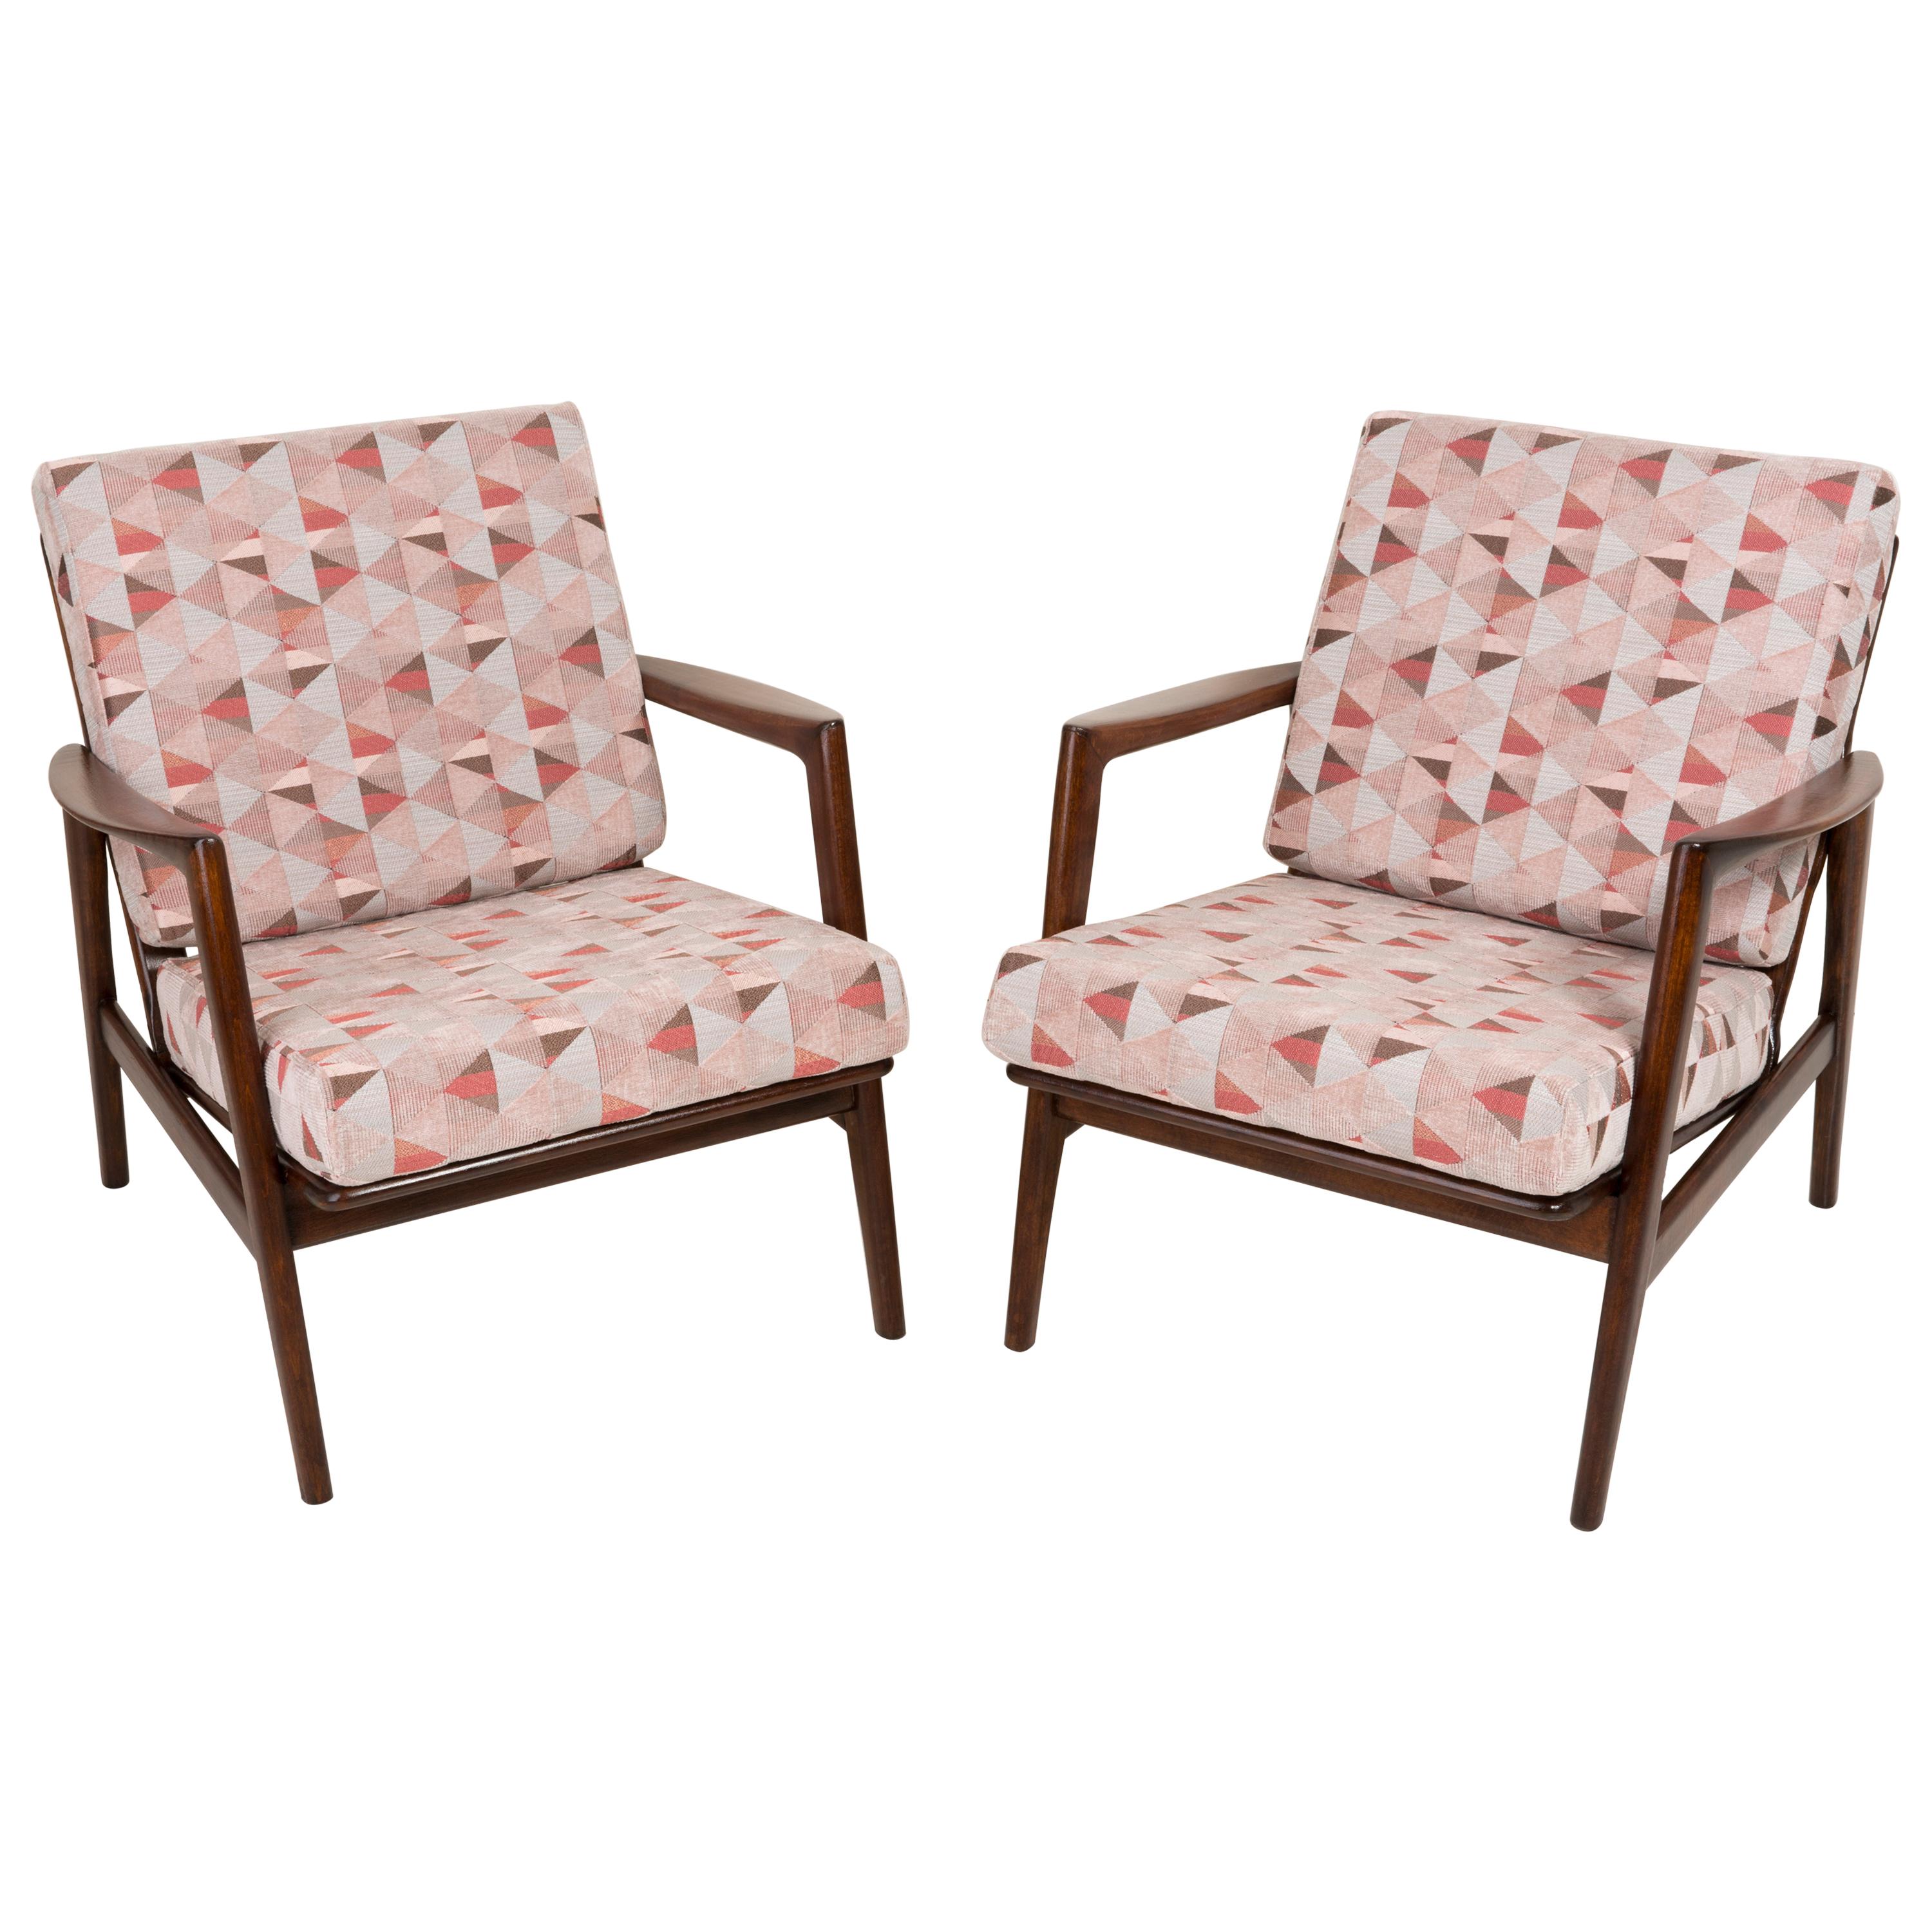 Pair of Geometric Pink Print Velvet Armchairs, 1960s, Poland For Sale